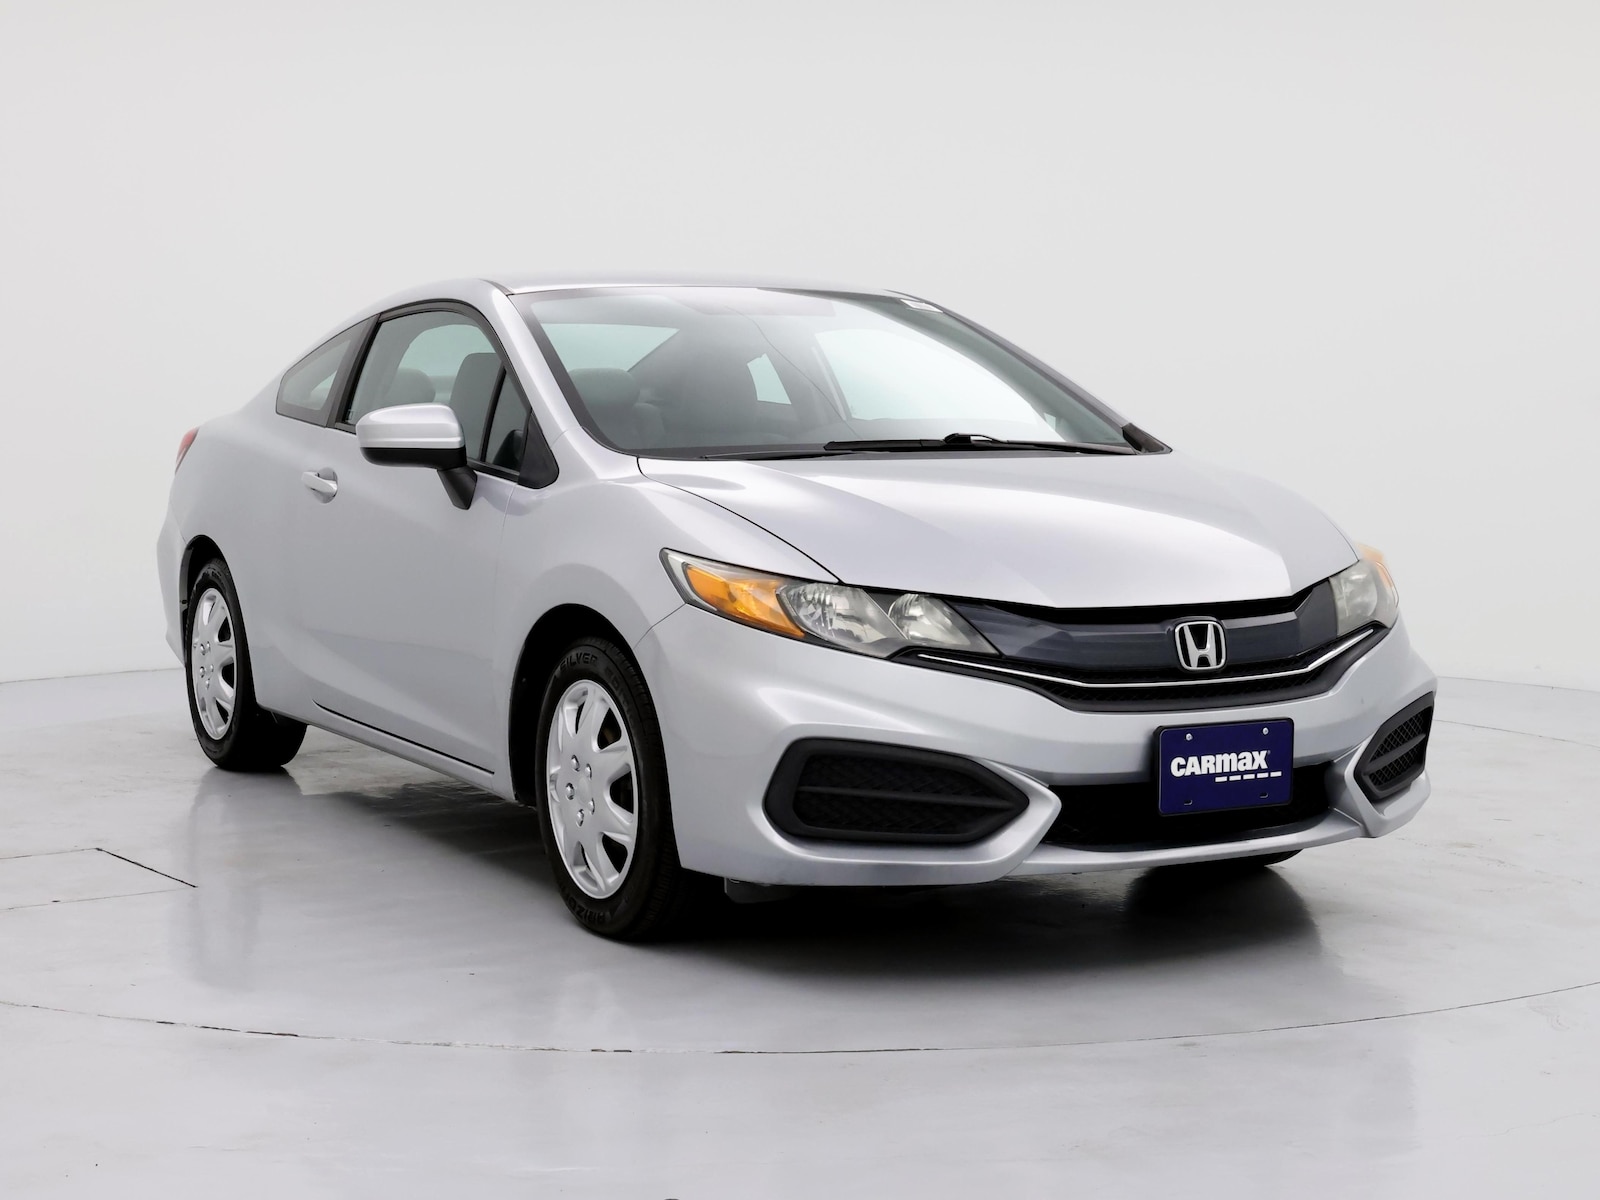 Used 2015 Honda Civic LX with VIN 2HGFG3B50FH517739 for sale in Kenosha, WI